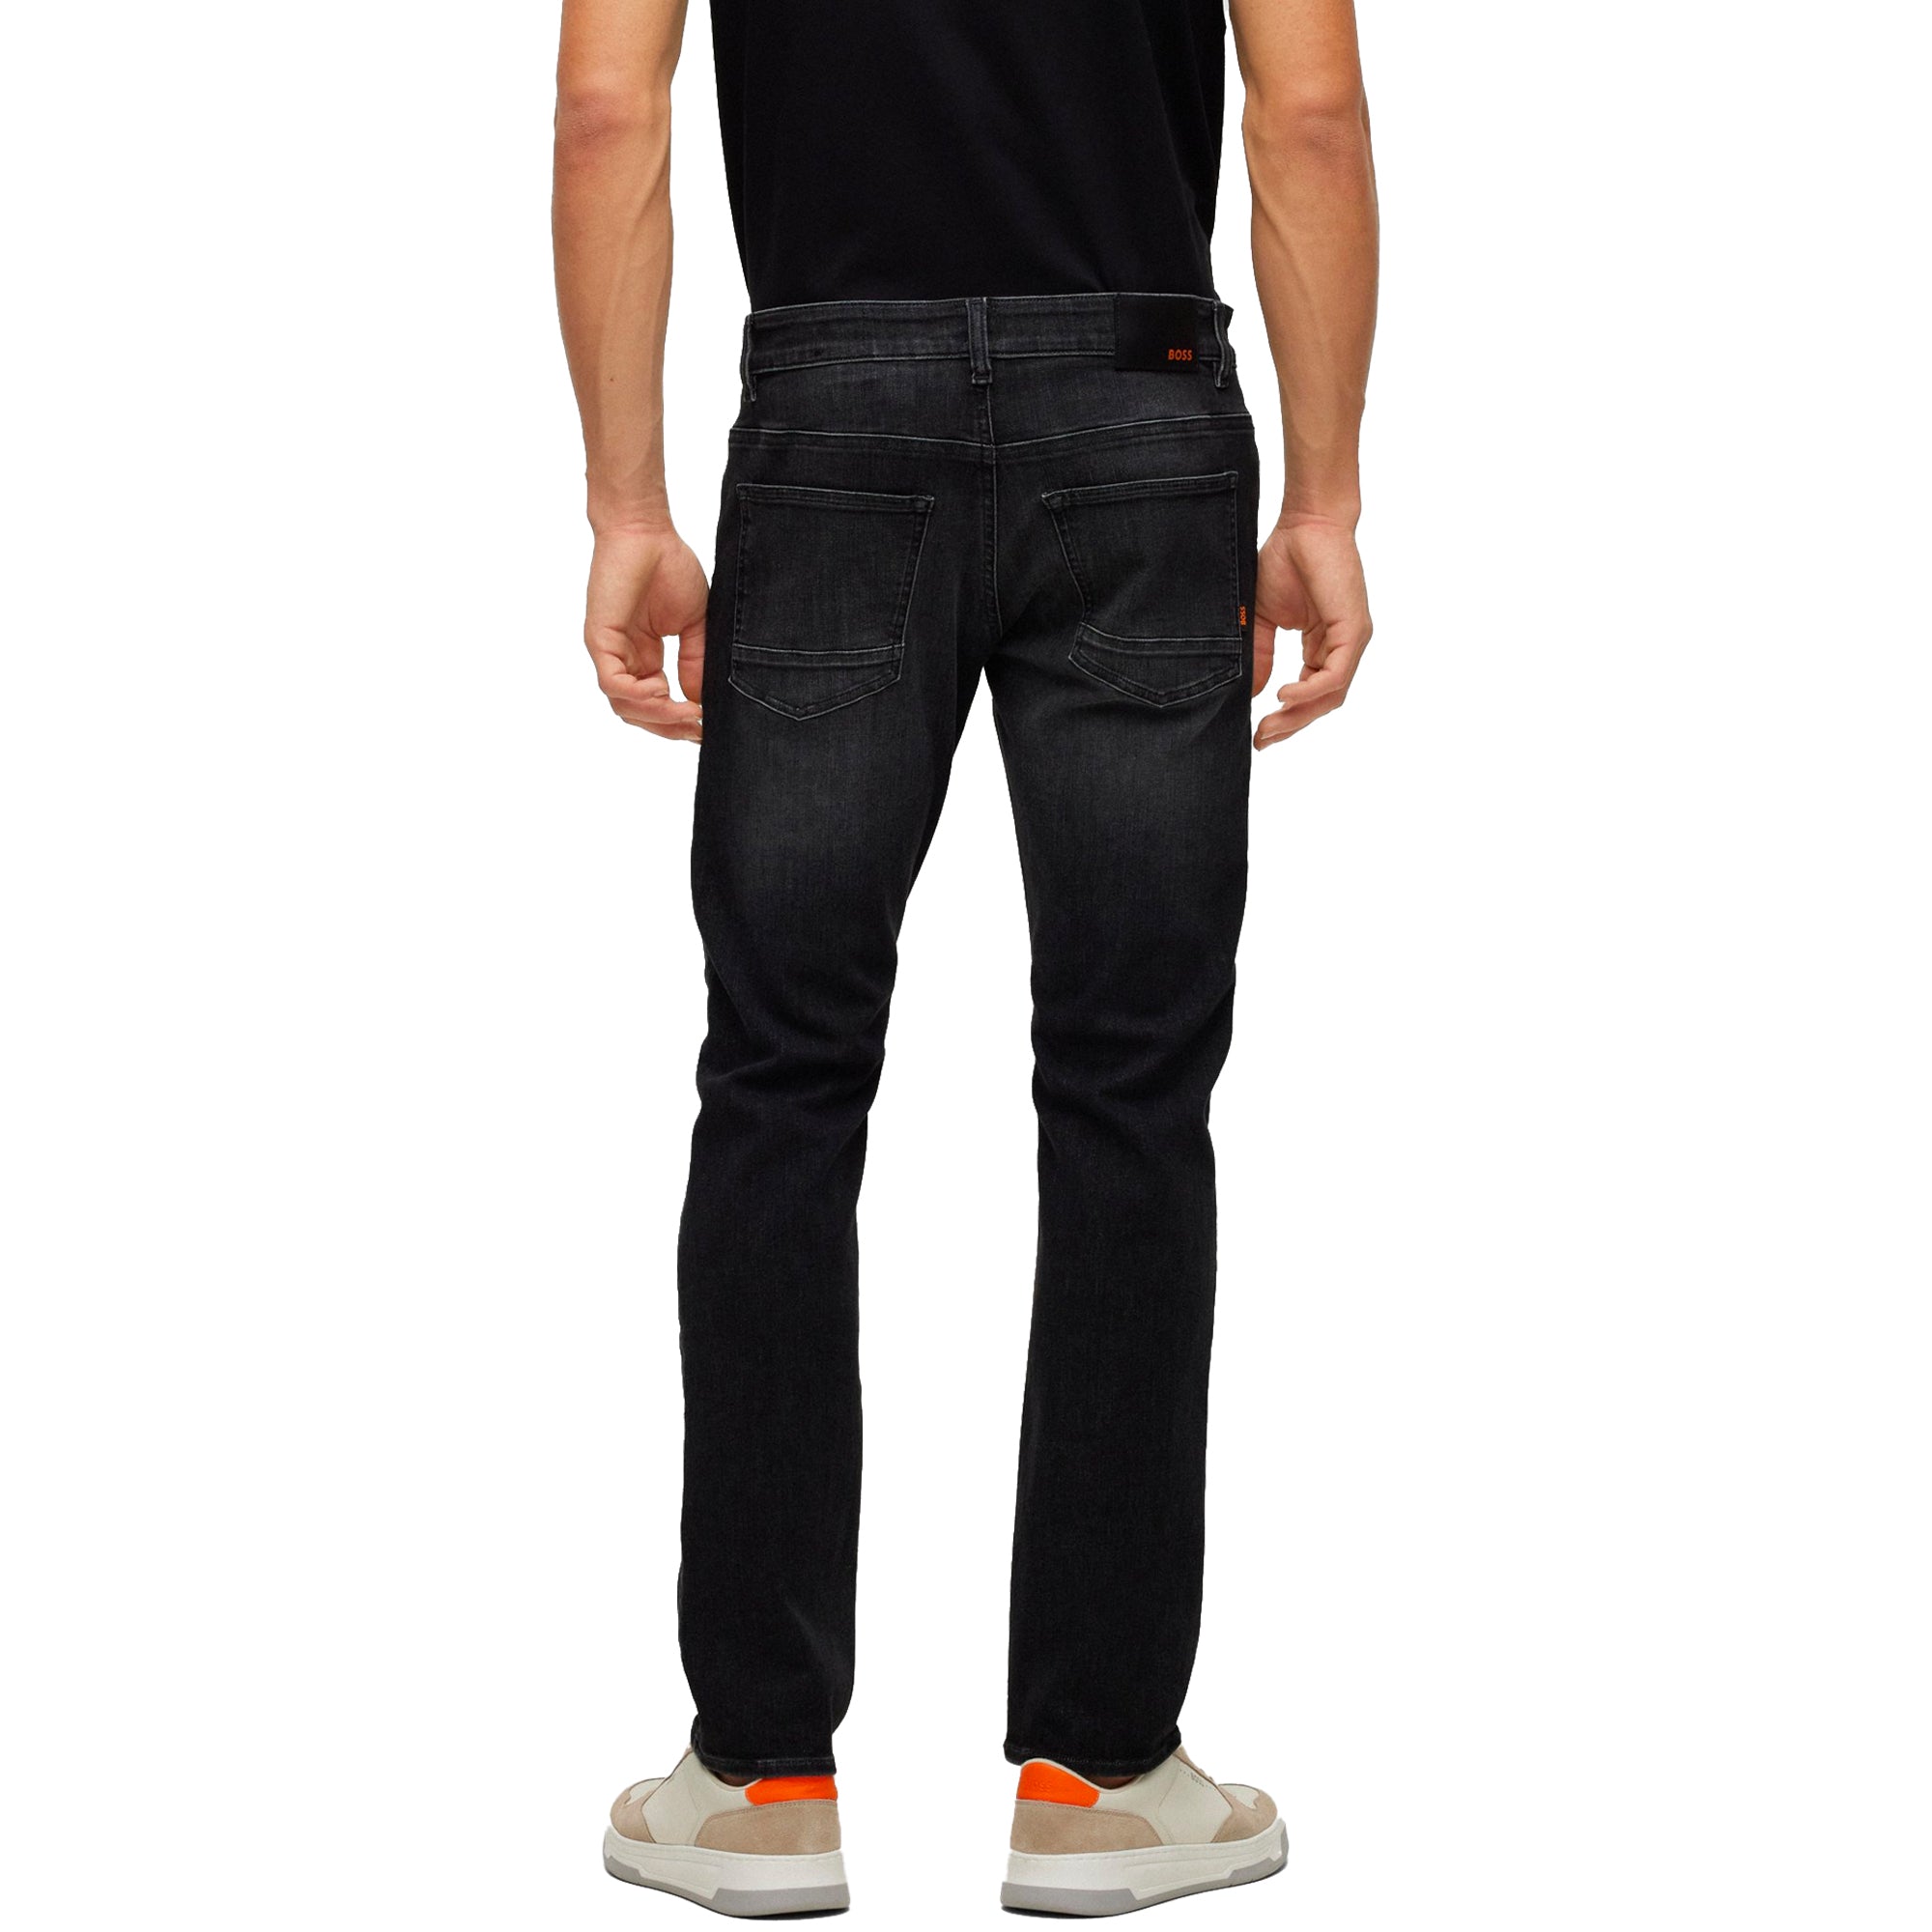 Boss Delaware Slim Fit Jeans - Pepper Charcoal Grey Stretch